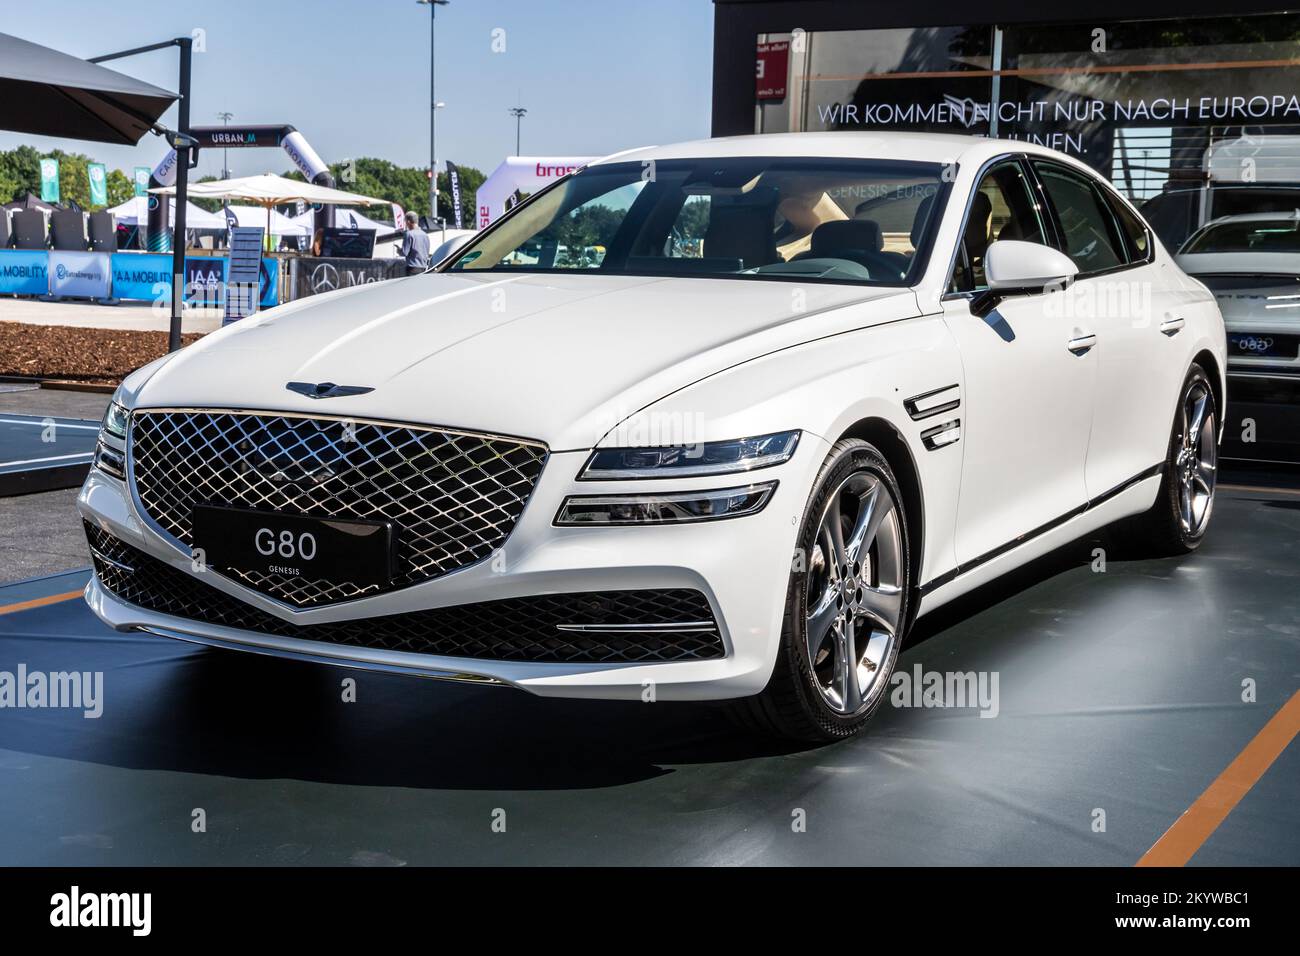 Genesis G80 luxury car showcased at the IAA Mobility 2021 motor show in Munich, Germany - September 6, 2021. Stock Photo